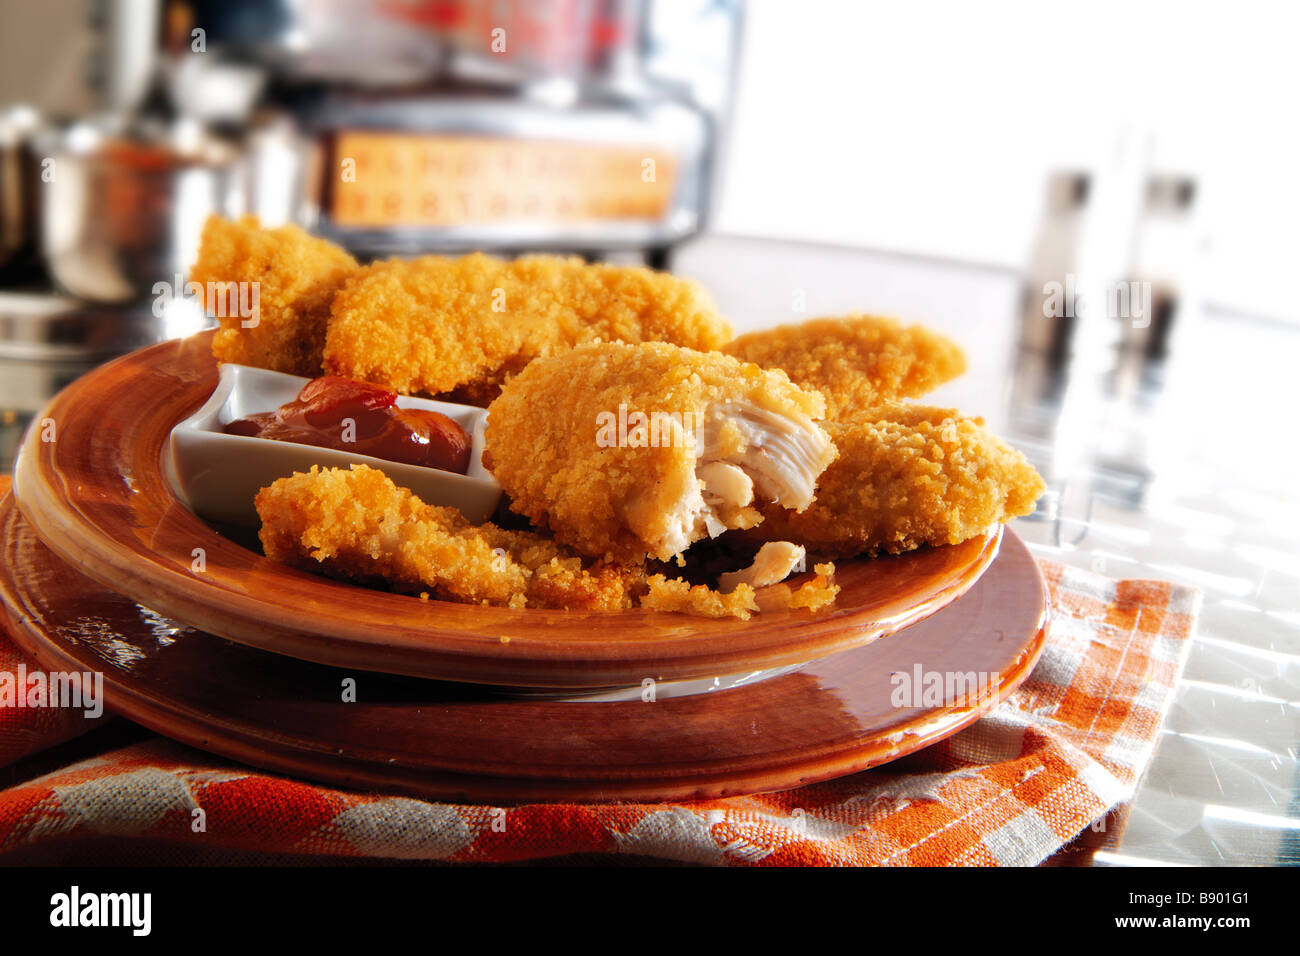 Southern Deep Fried Chicken Stock Photo